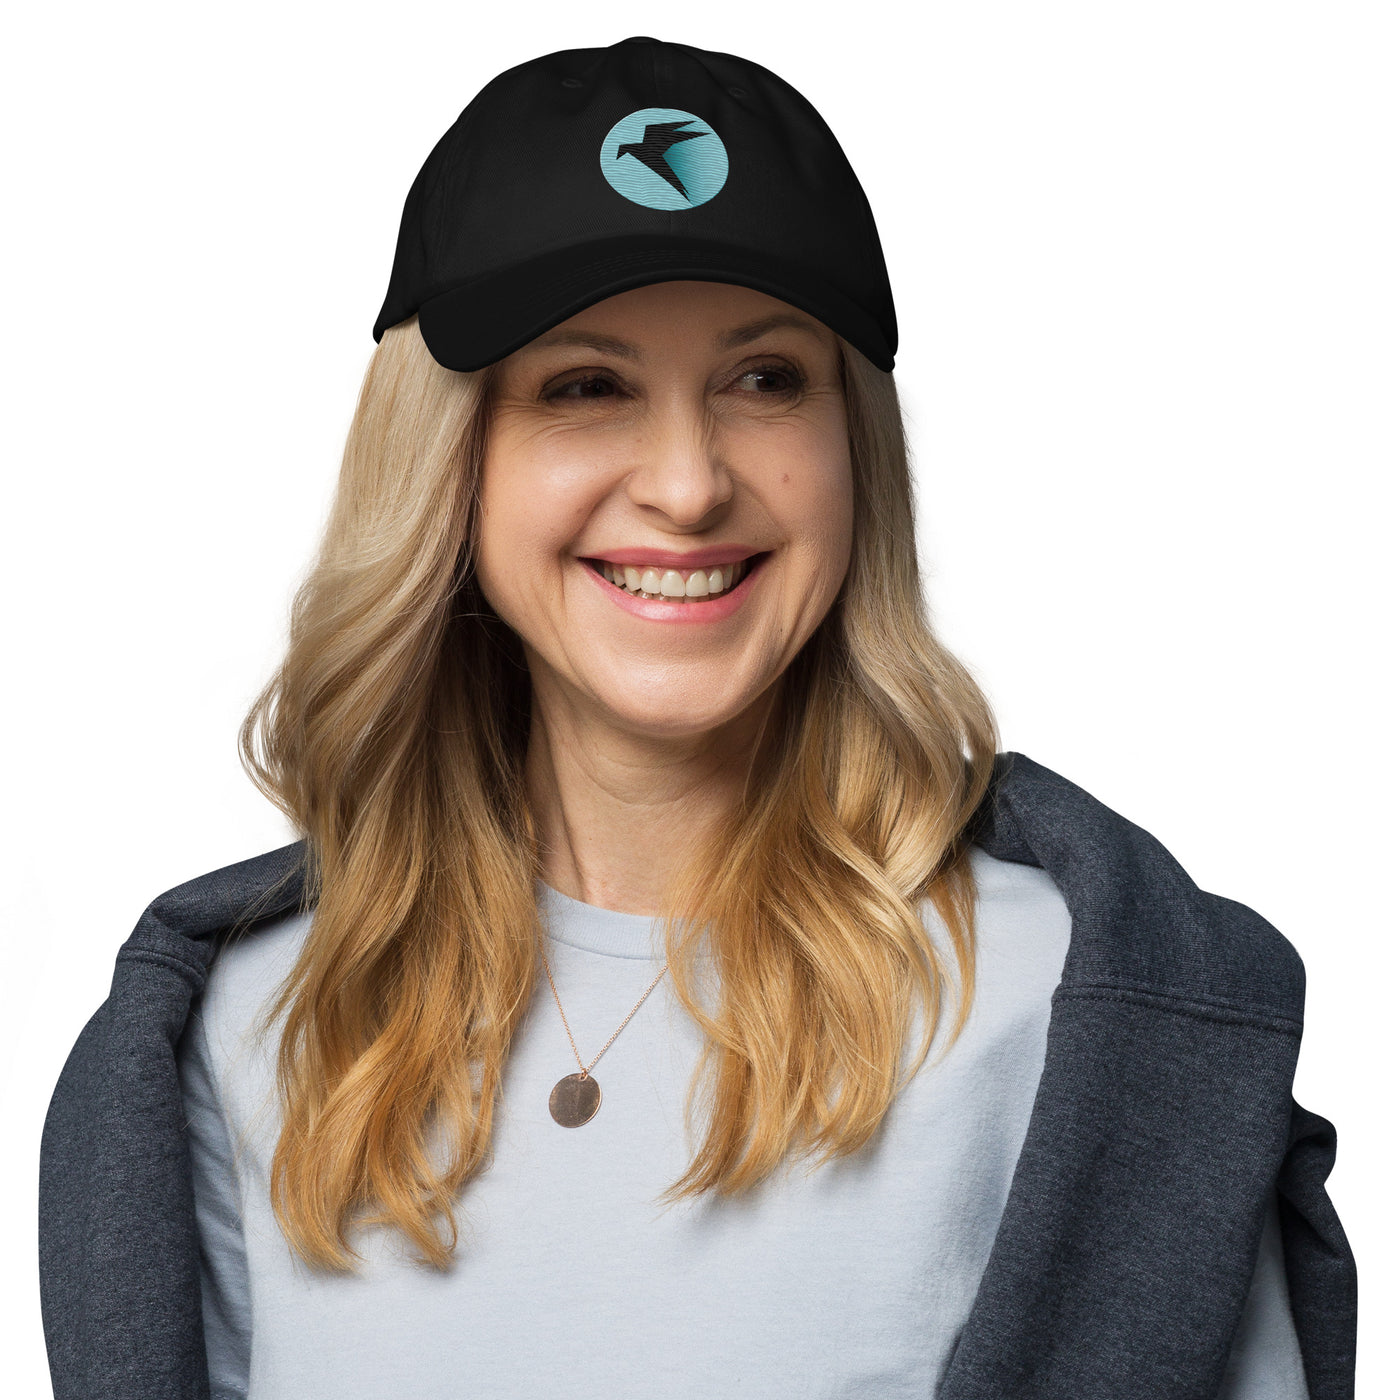 Parrot OS - The operating system for Hackers - Dad hat